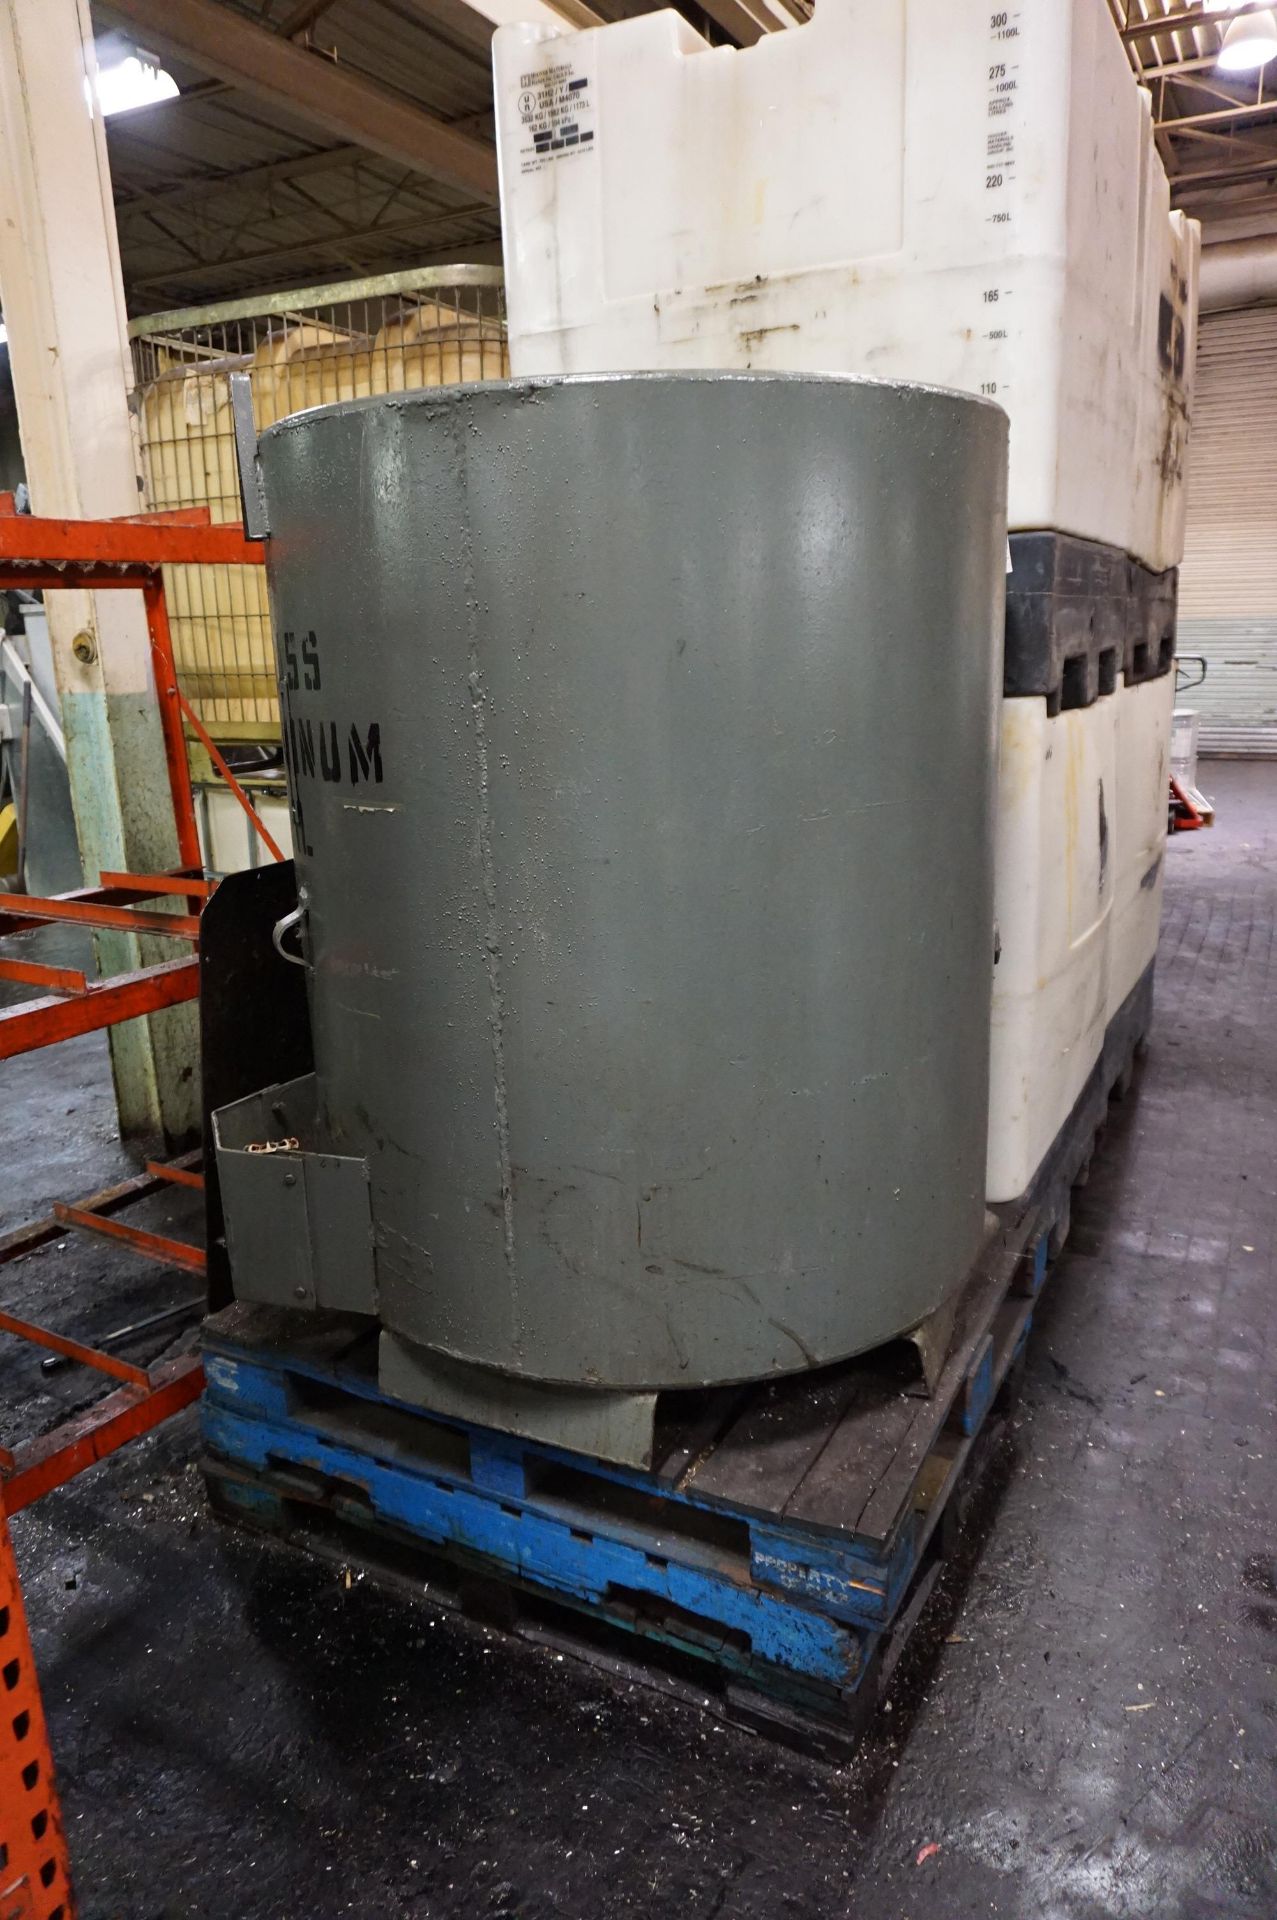 LARGE STEEL TANK, 50" H X 43 1/2" DIAMETER, 1/2 TON RIGGING CLAMPS AND CHAIN - Image 2 of 3